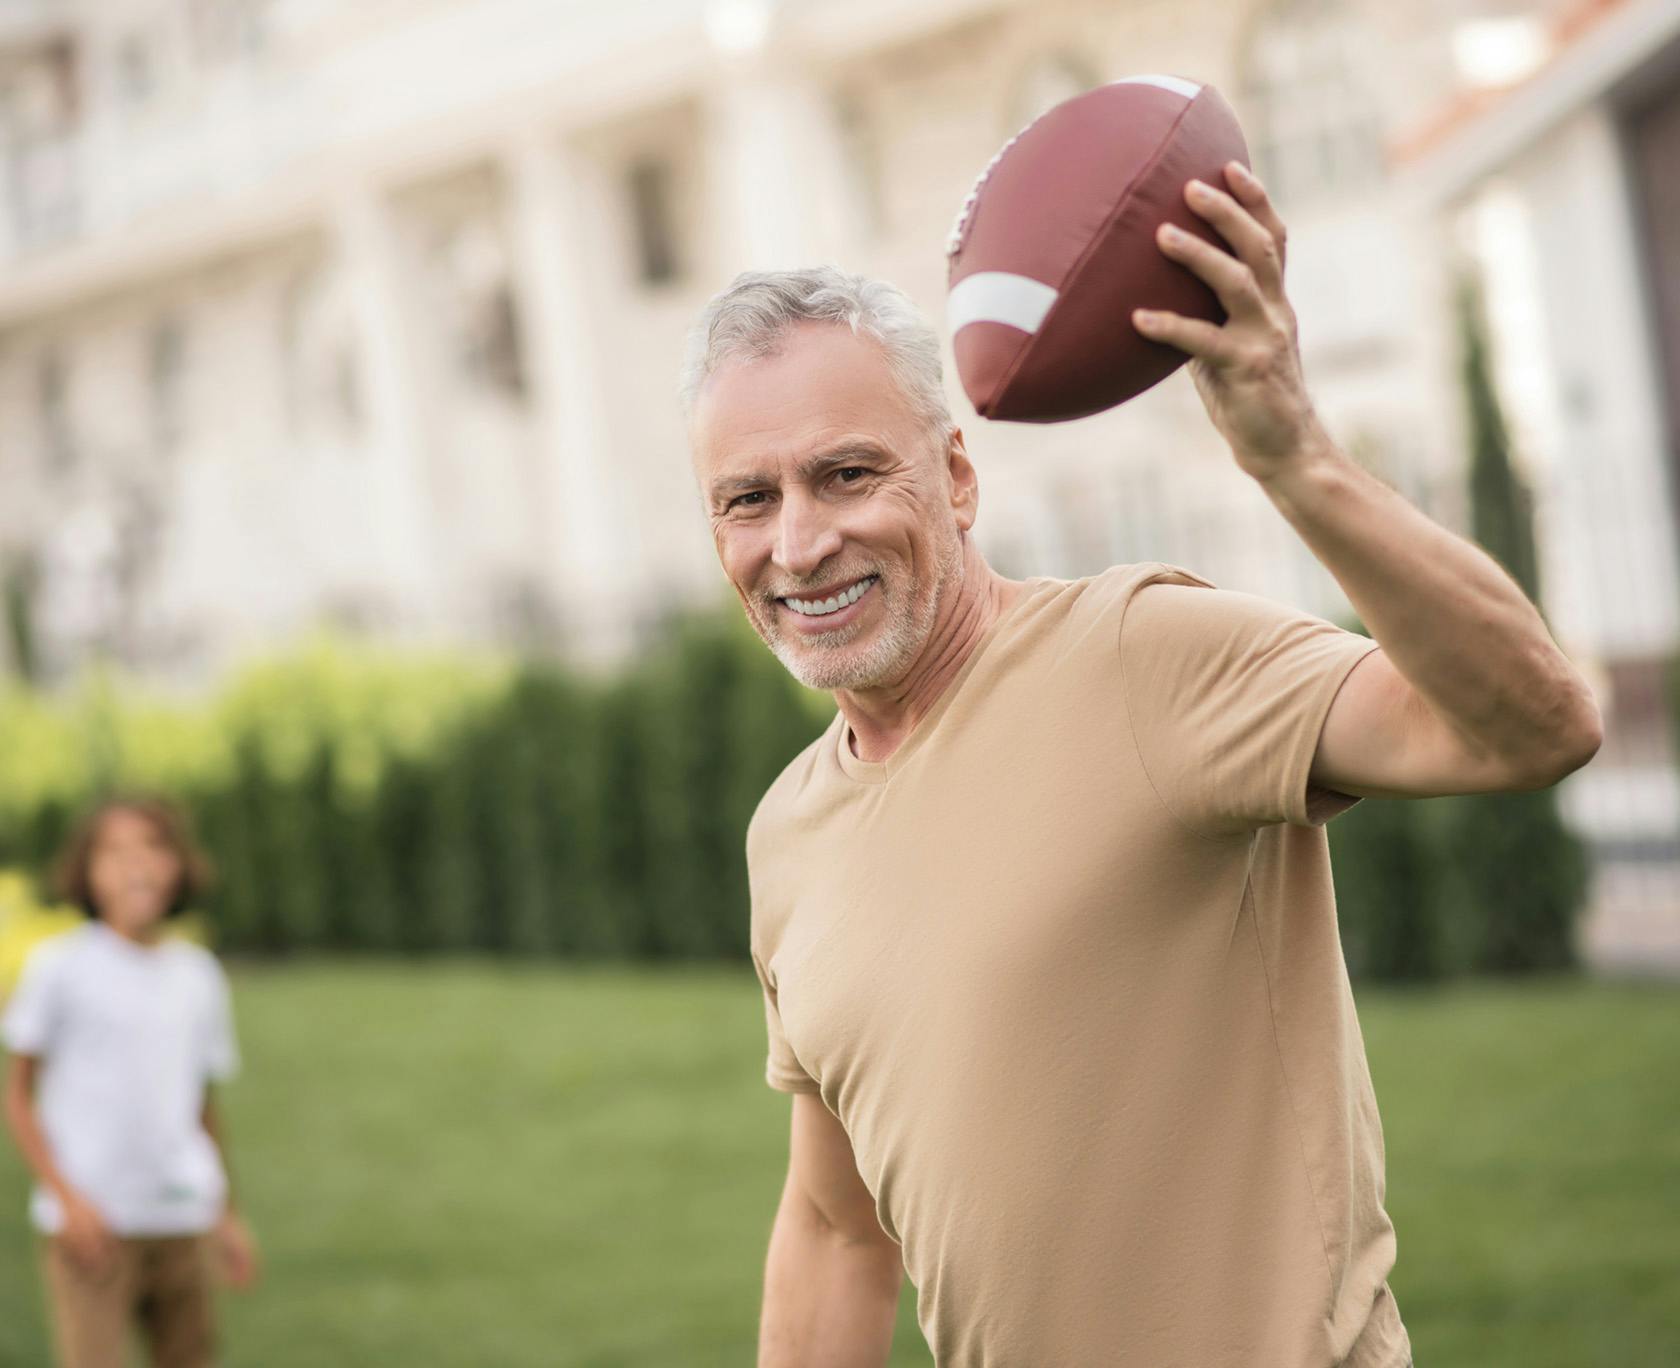 older man throwing a football in a park with a young boy in the background